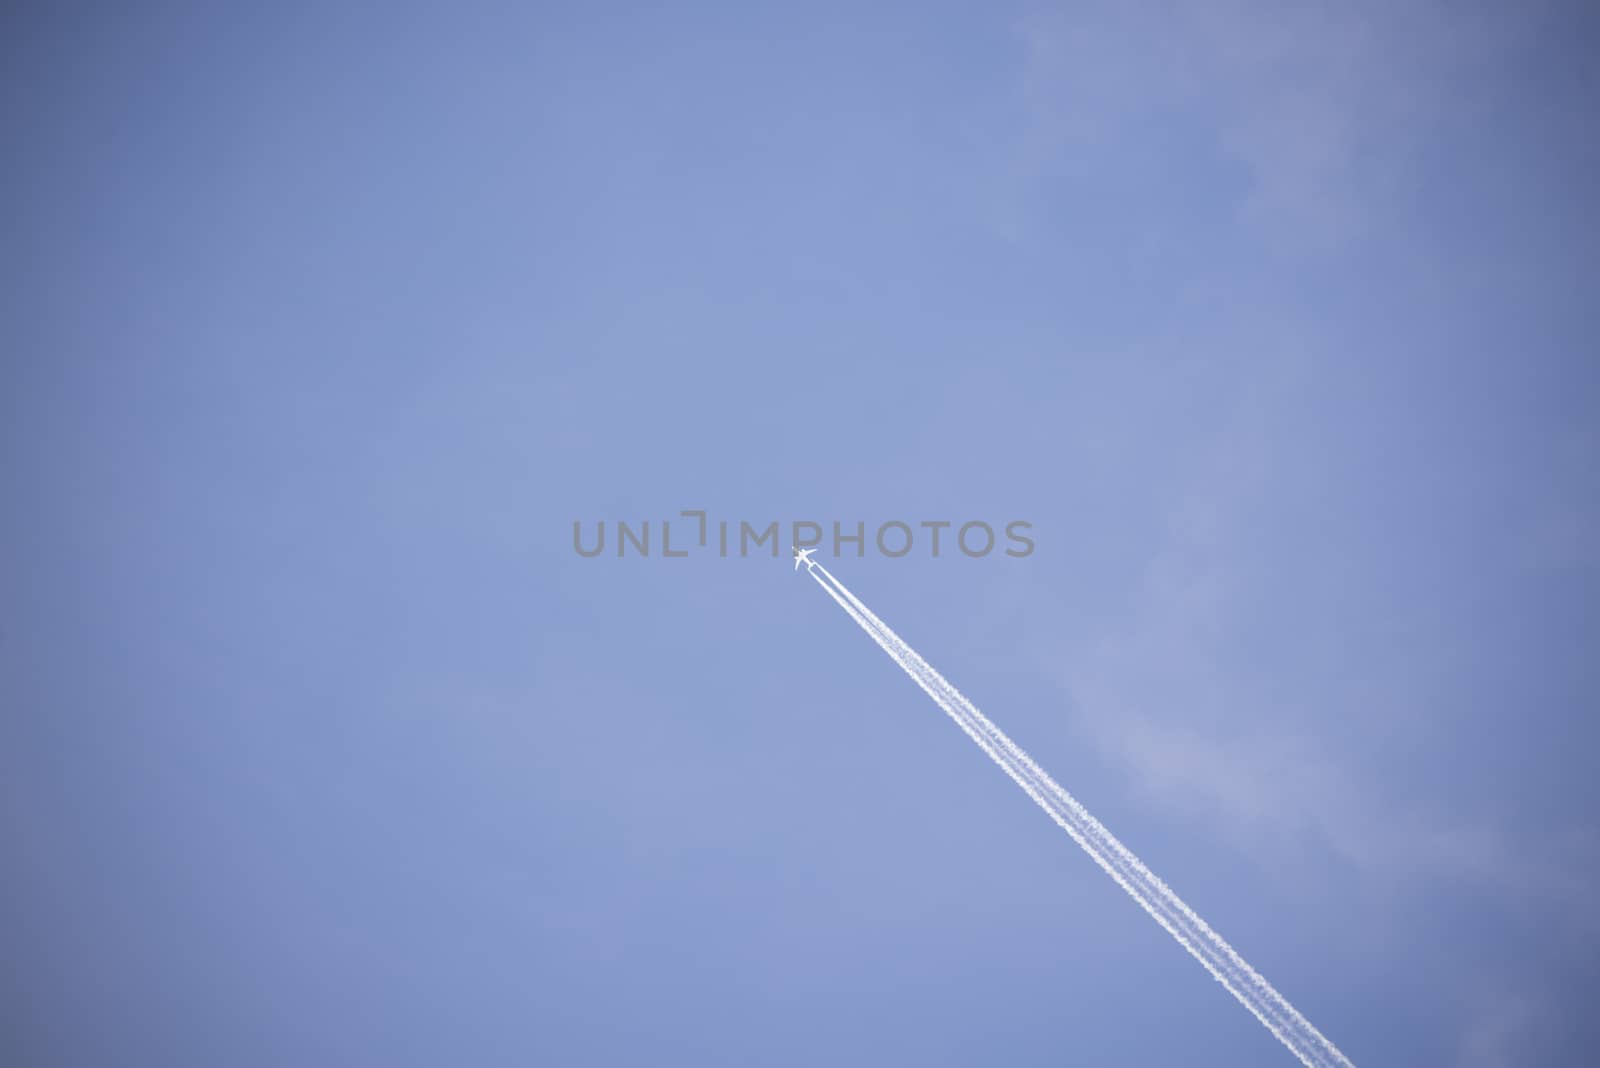 jet and its vapour trails by morrbyte